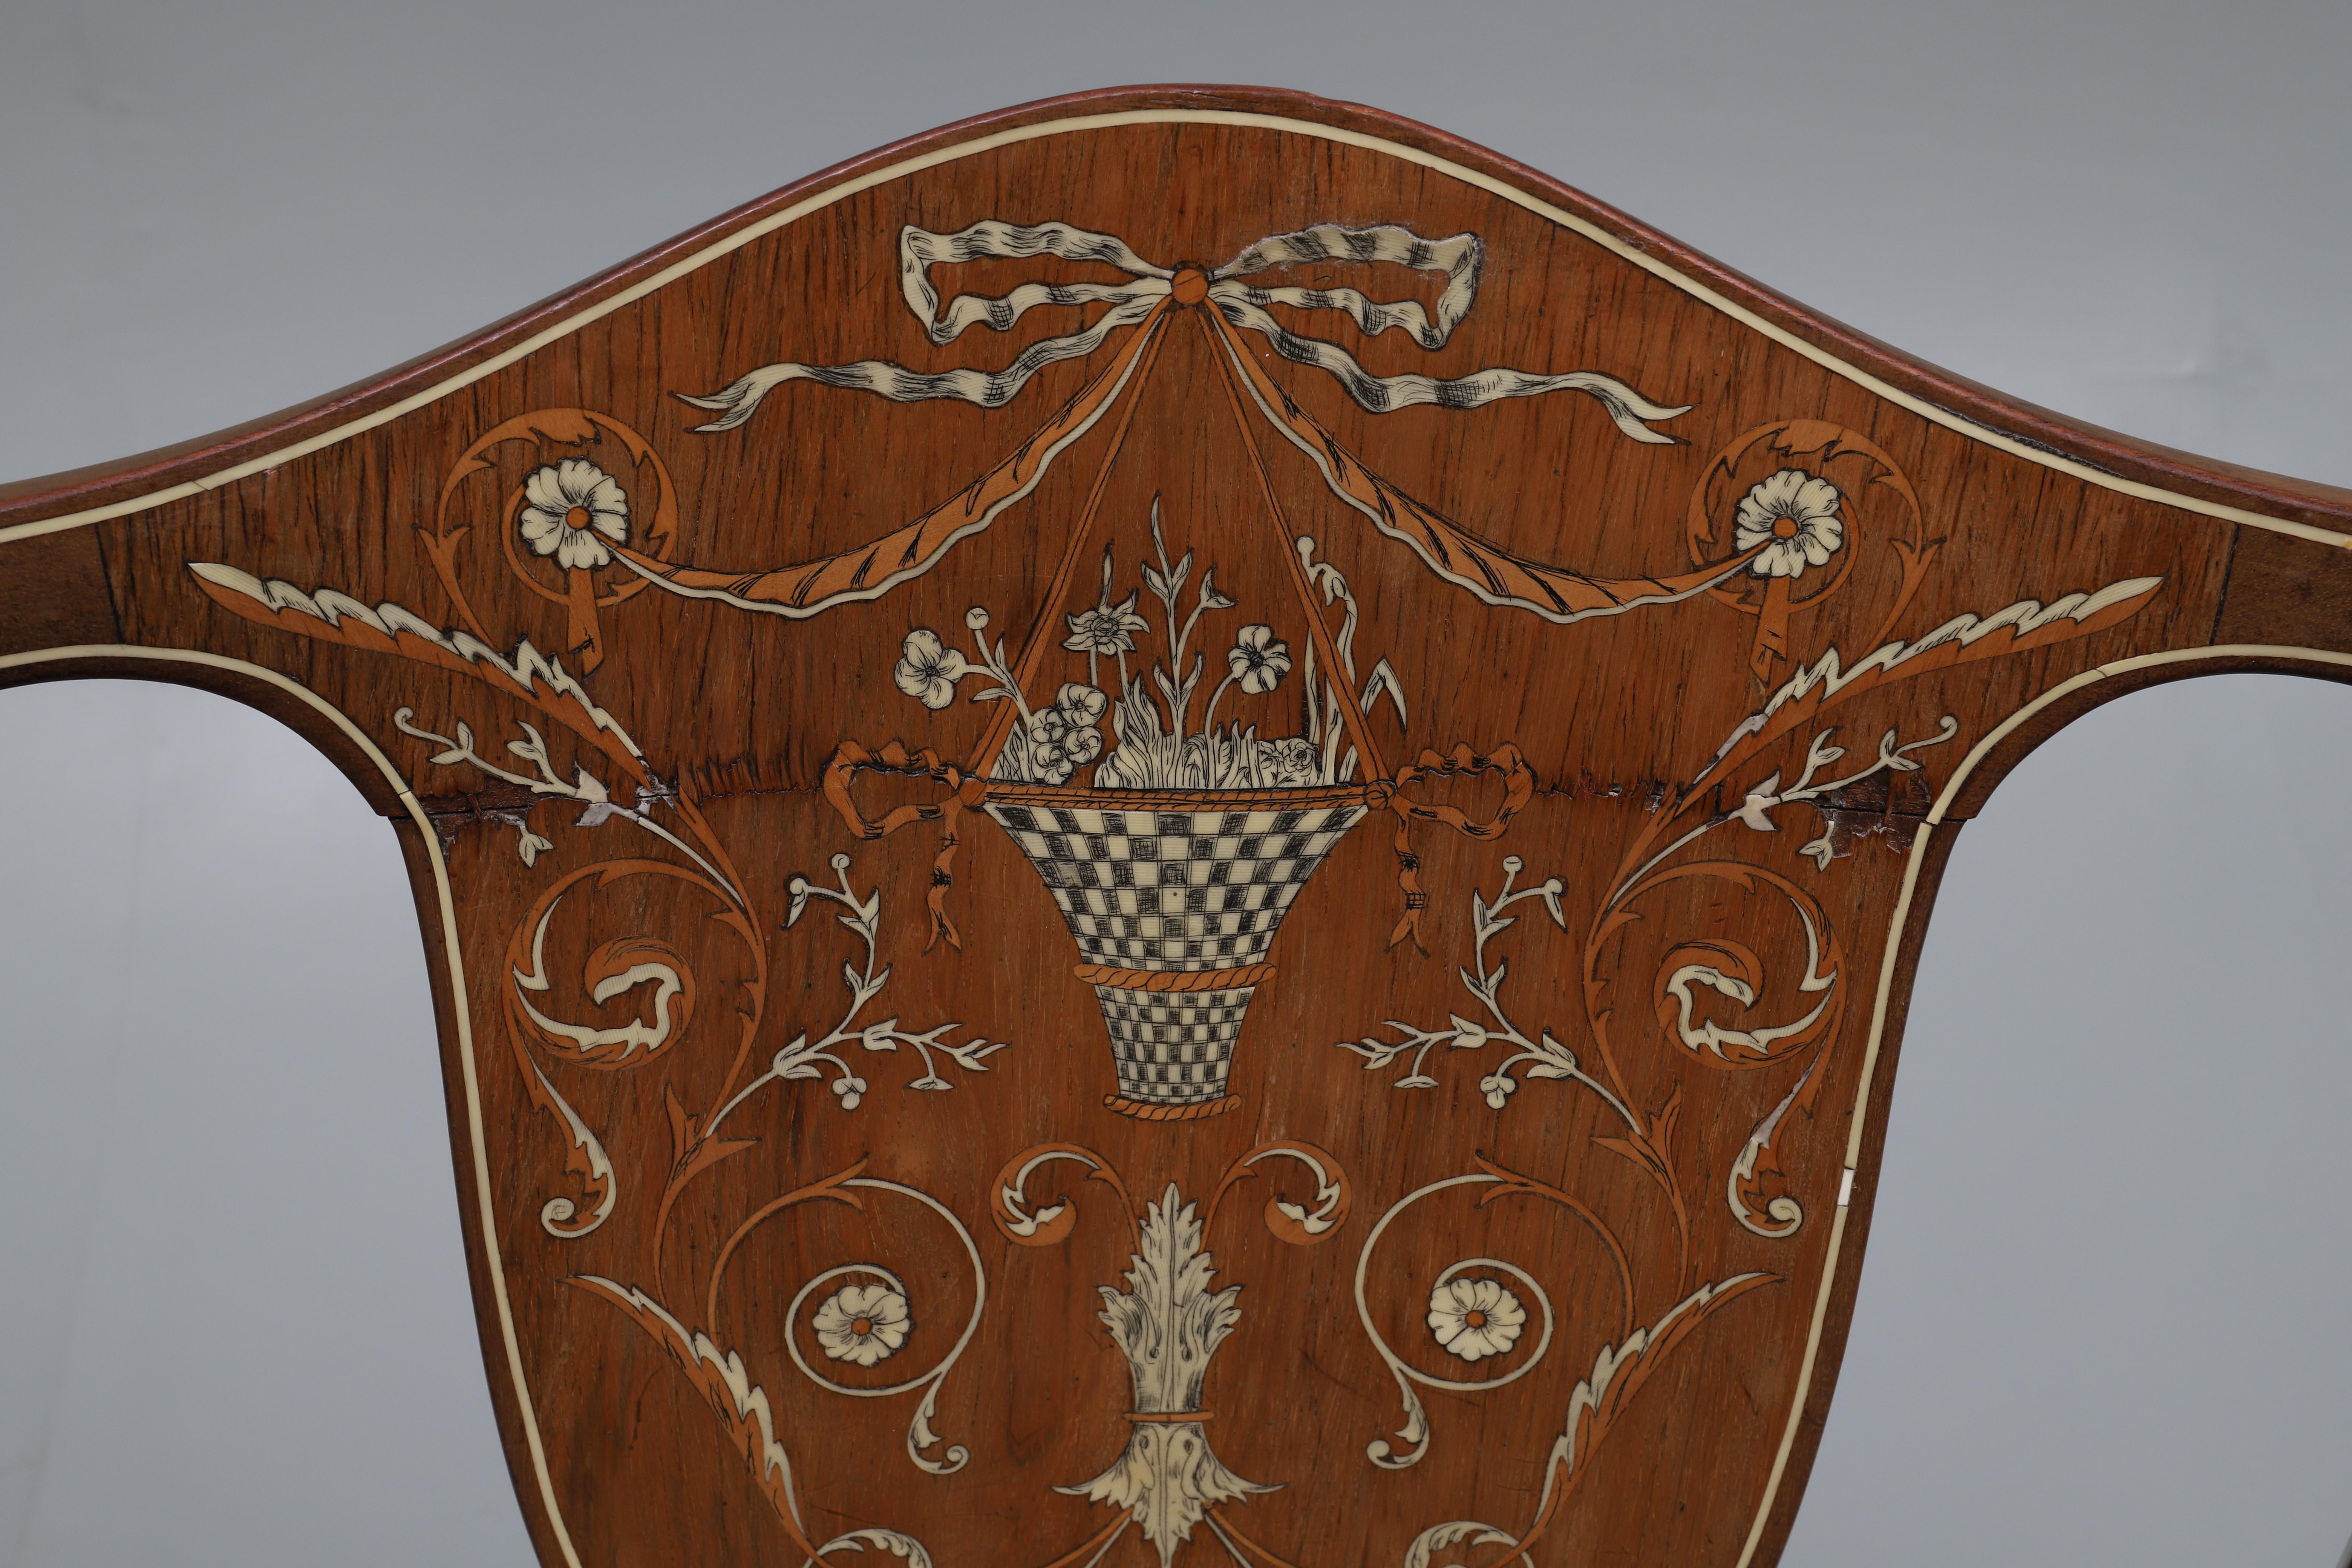 The shaped curved back with a central hardwood panel inlaid with a ribbon tied hanging basket of flowers surrounded by flowering and scrolling branches, having an upholstered seat, on square tapering legs with spade feet, measures: 55cm wide x 48cm